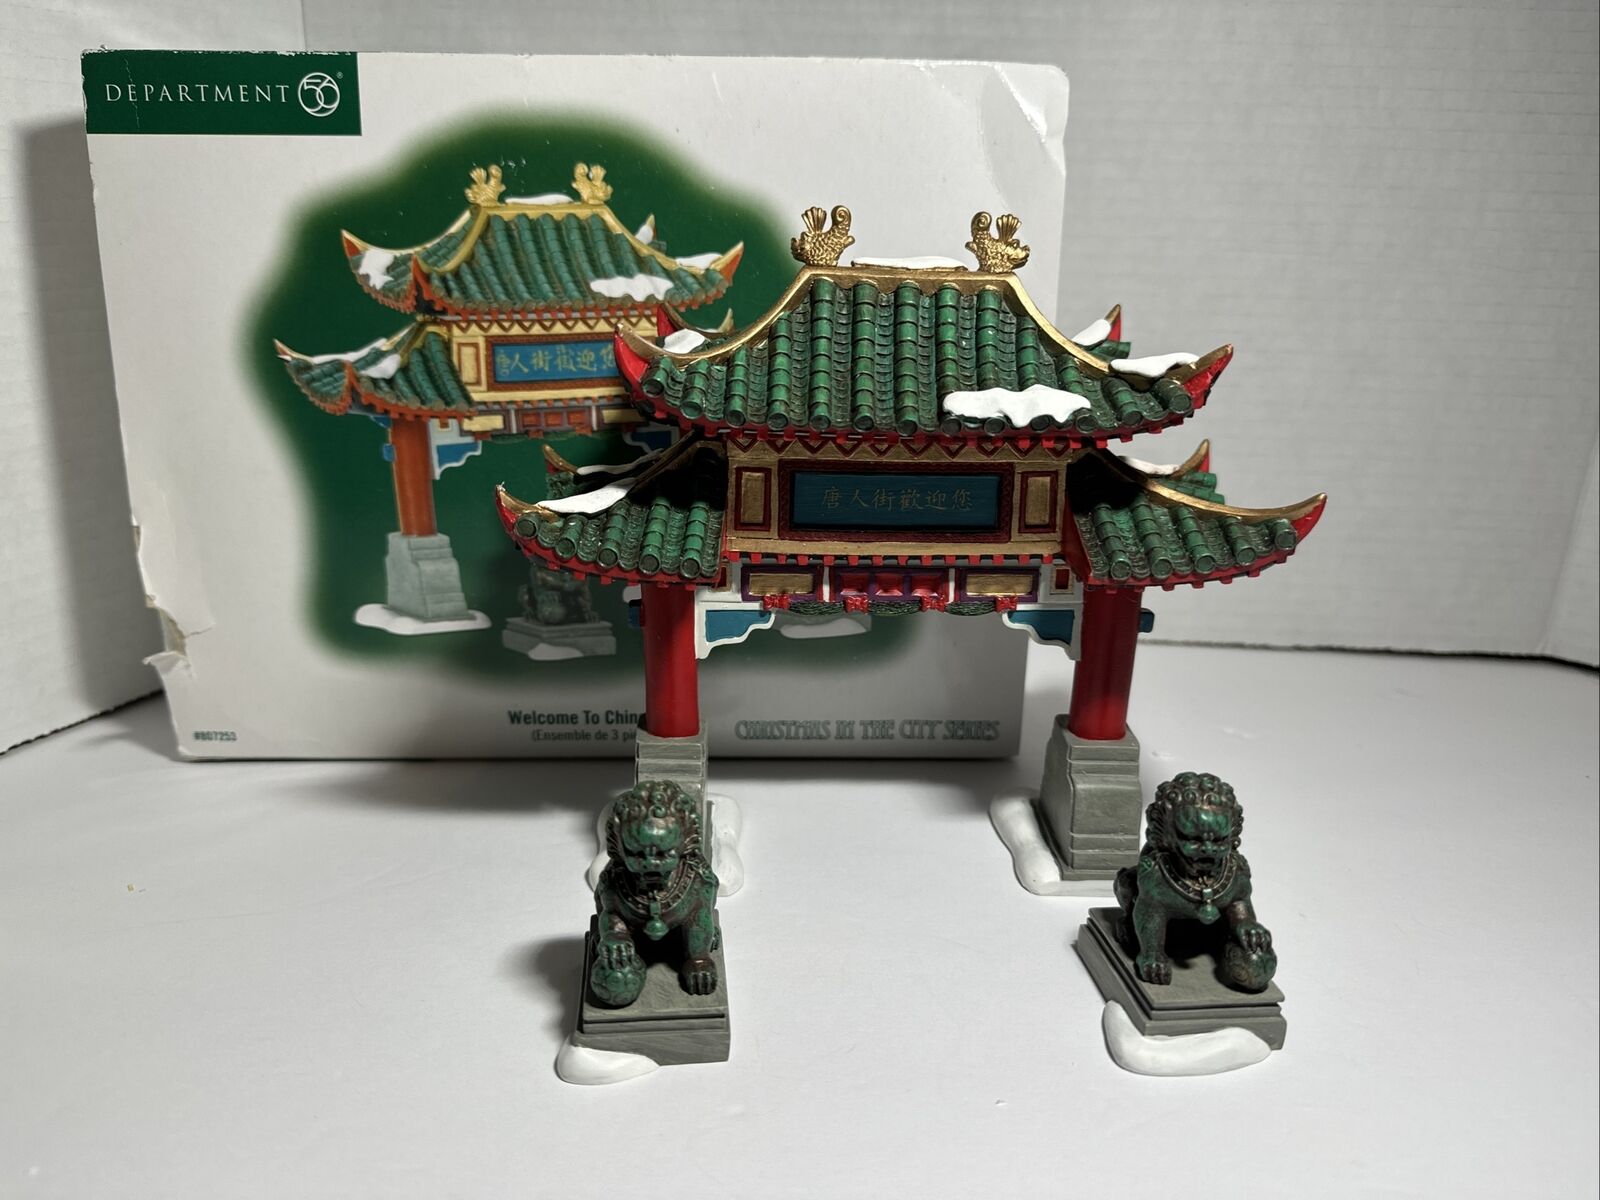 Department 56 Welcome to Chinatown  Christmas in the City Series w/ box 3 Piece